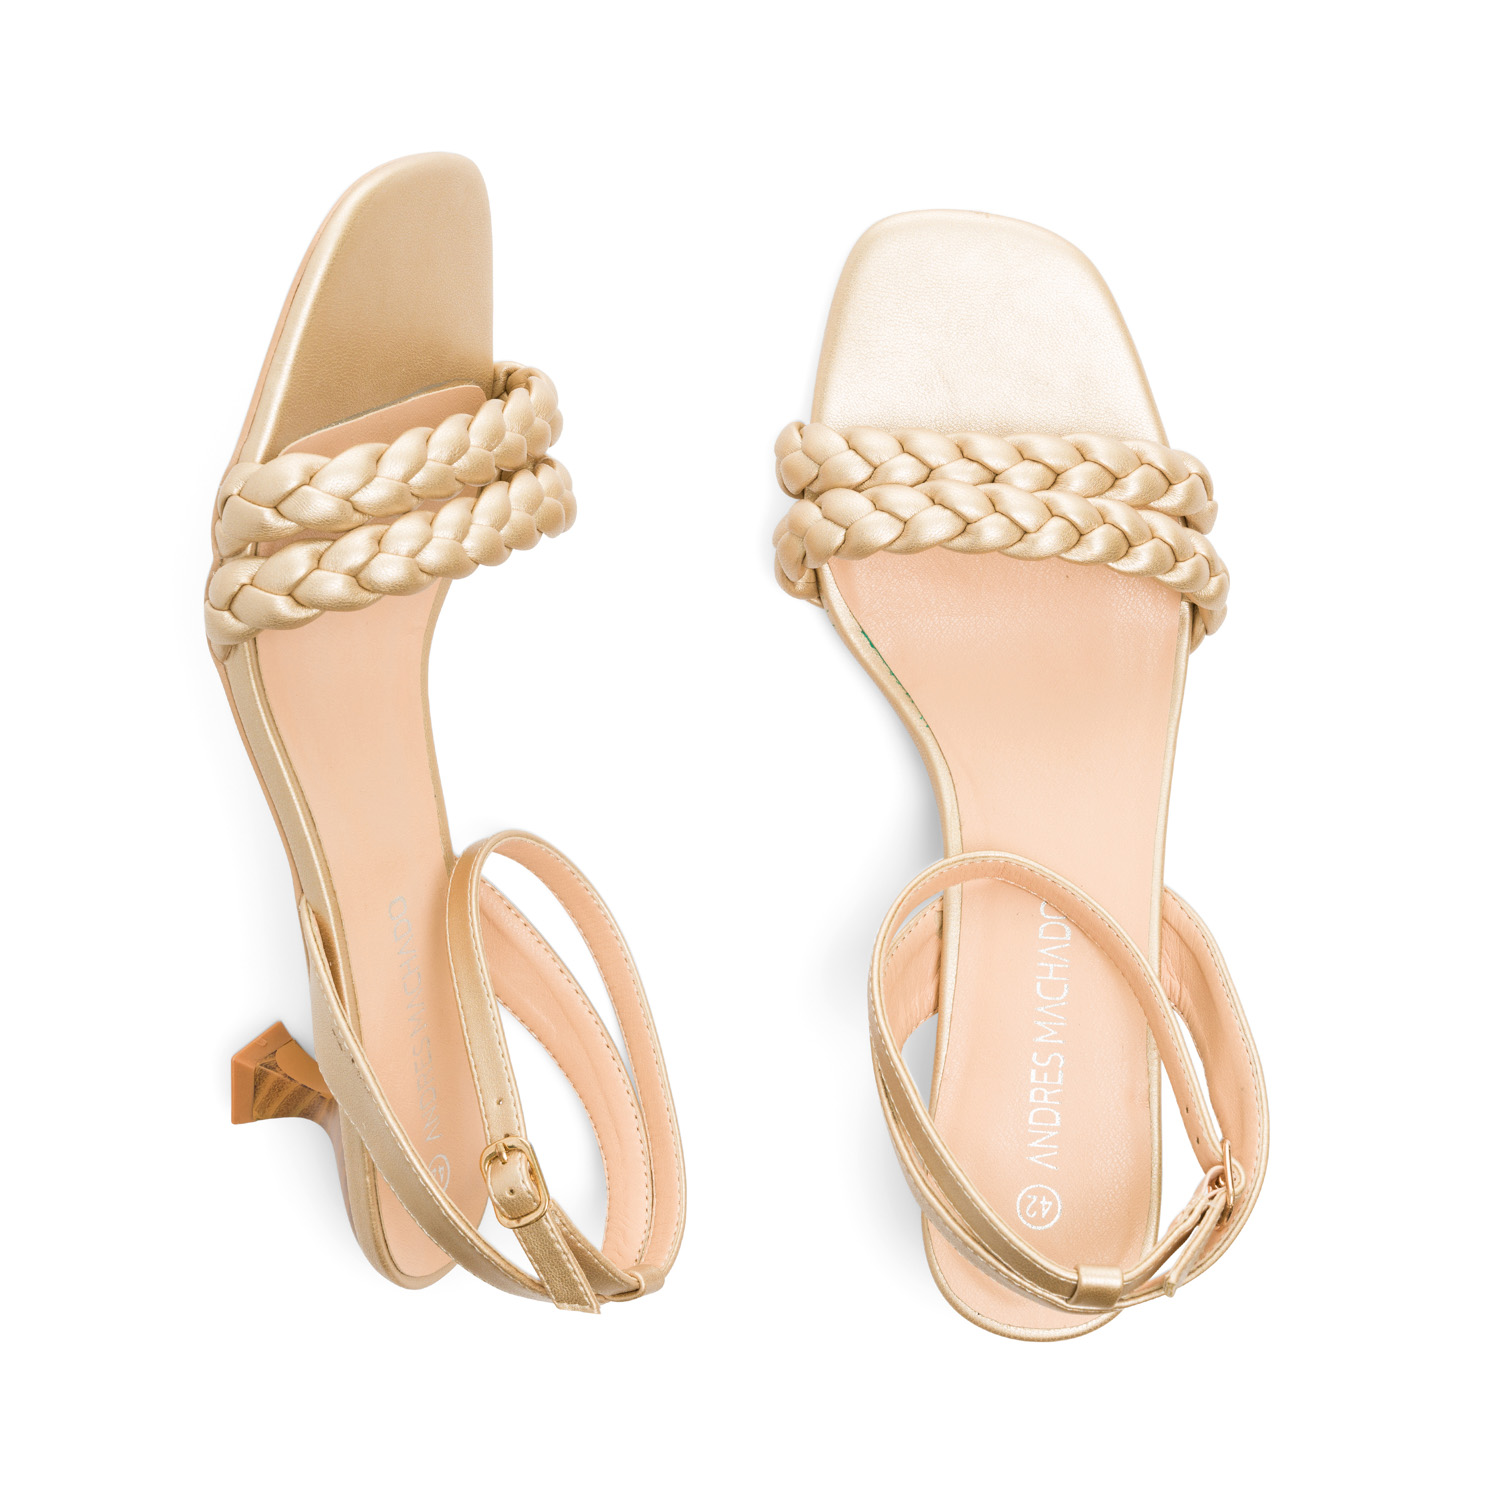 Gold faux leather sandals 